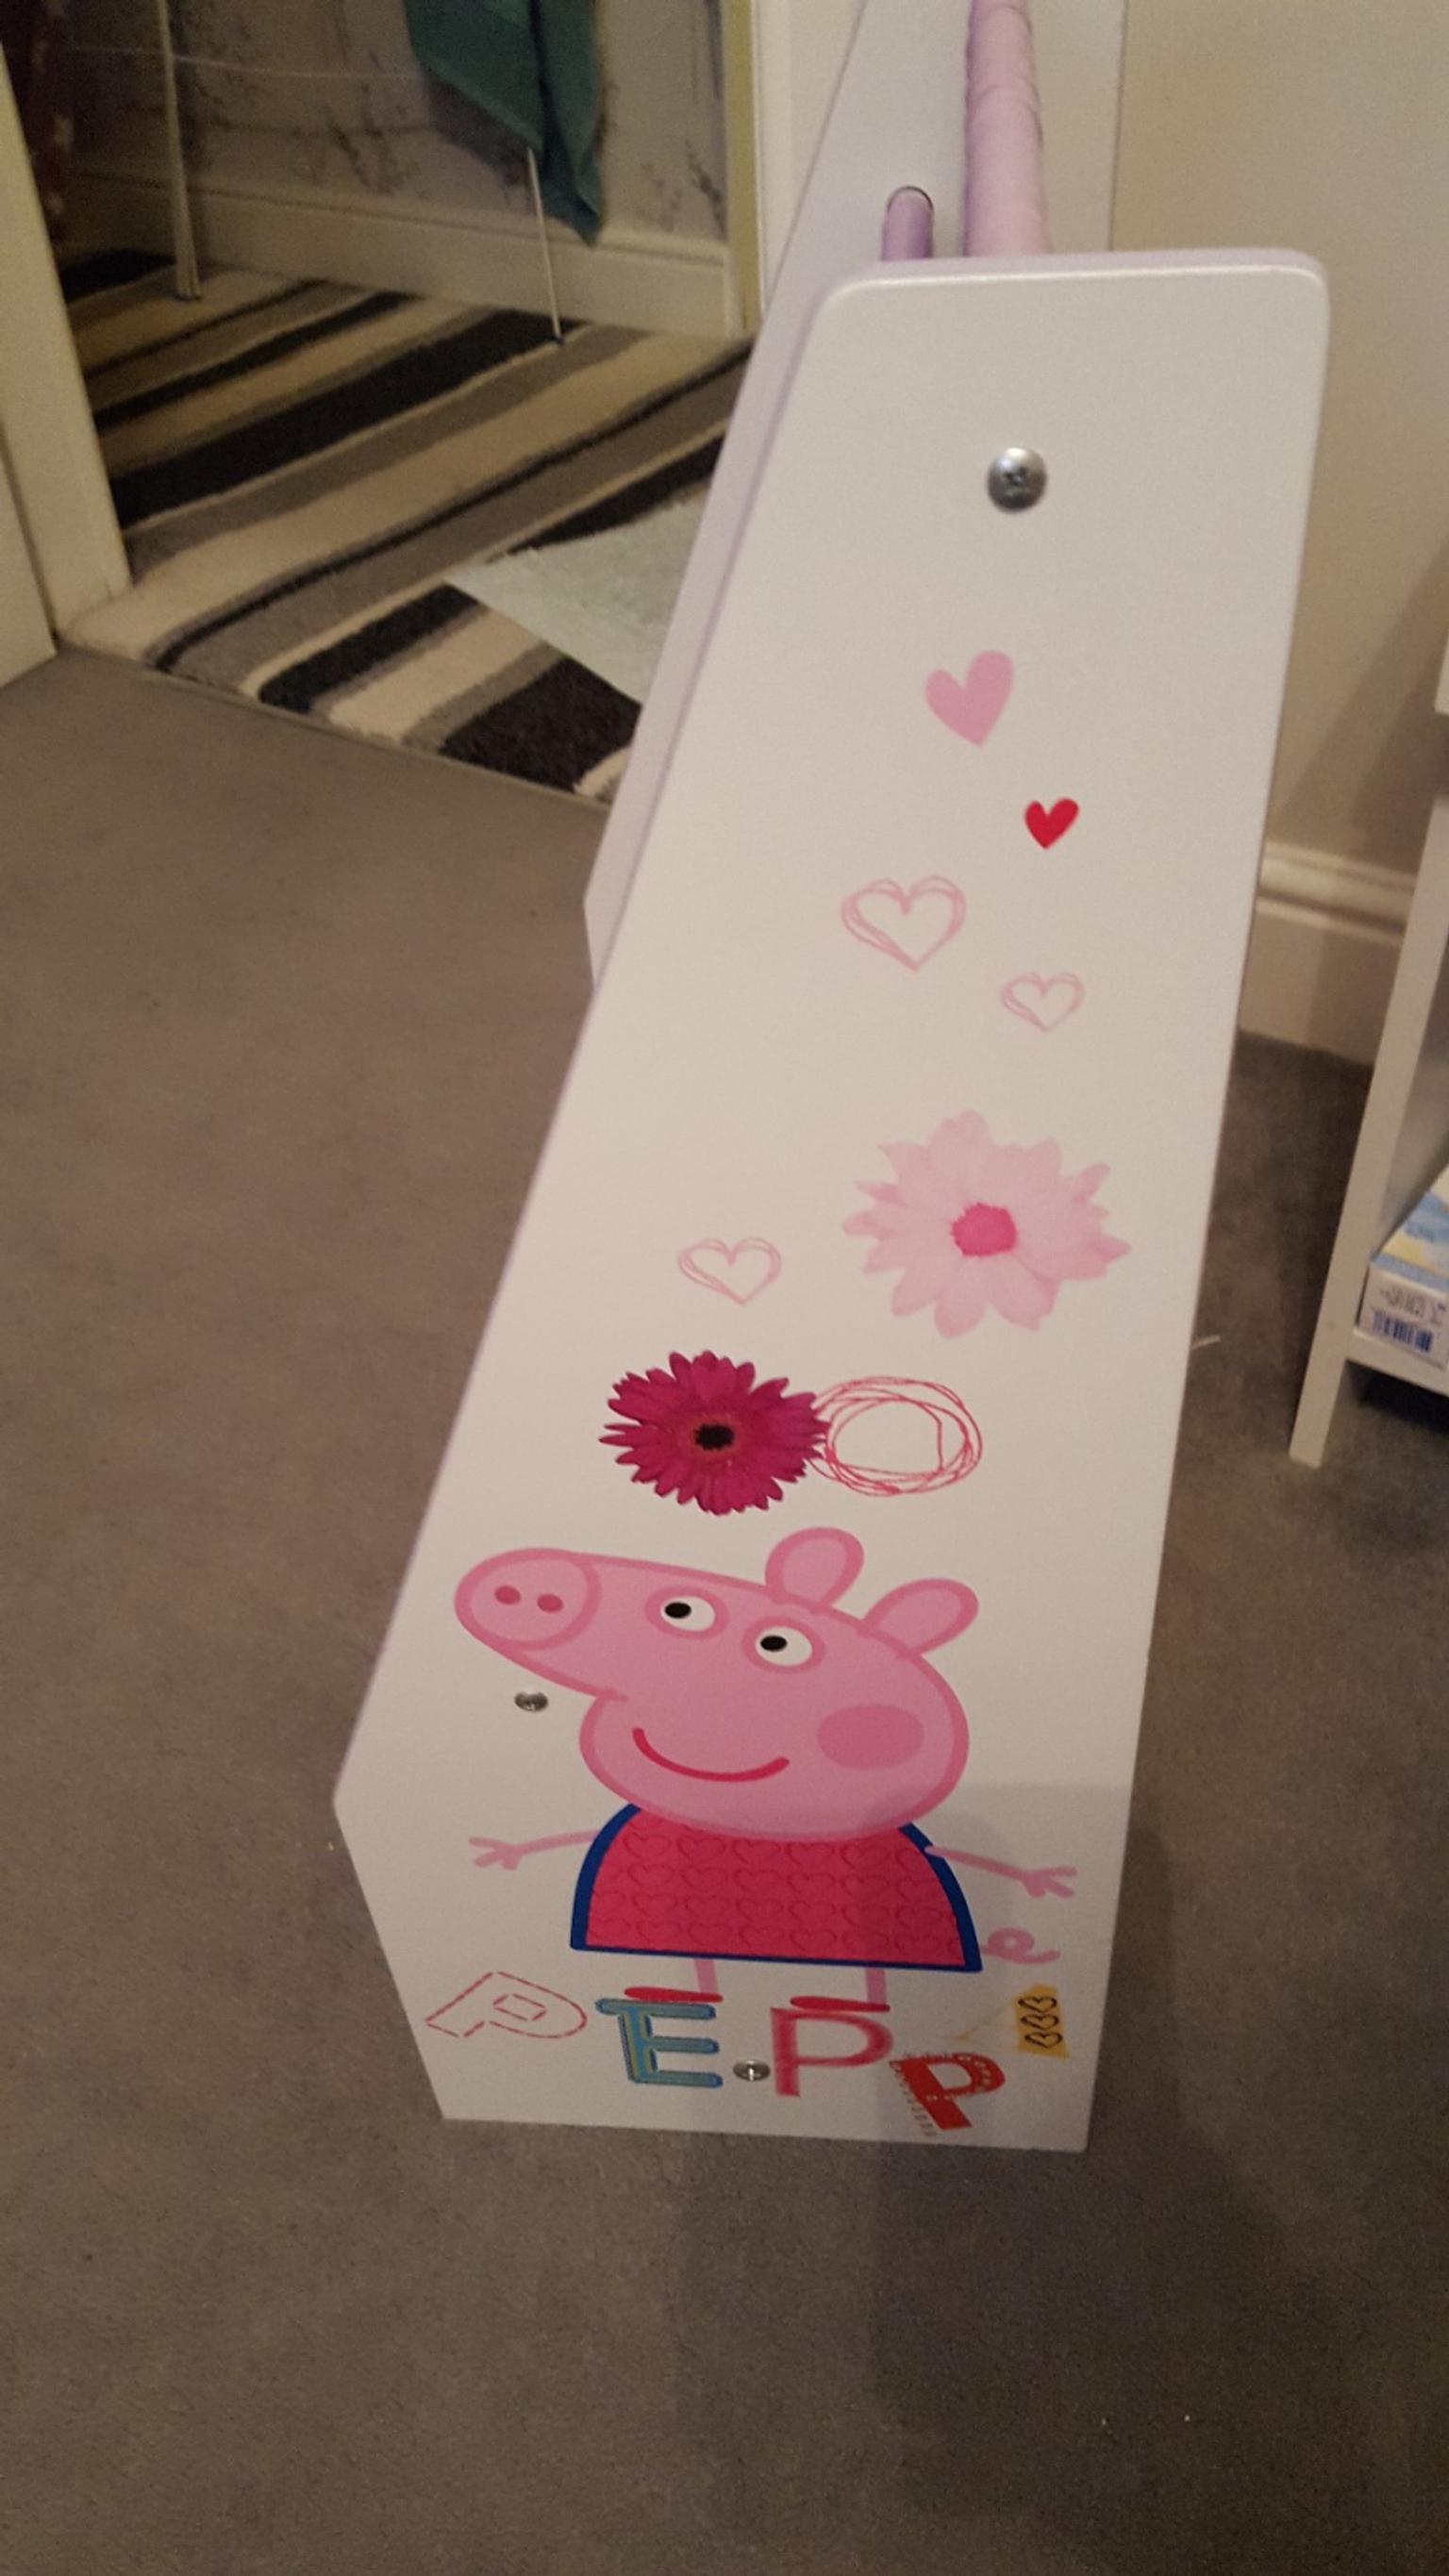 Peppa Pig Sling Bookcase In M40 Oldham For 5 00 For Sale Shpock